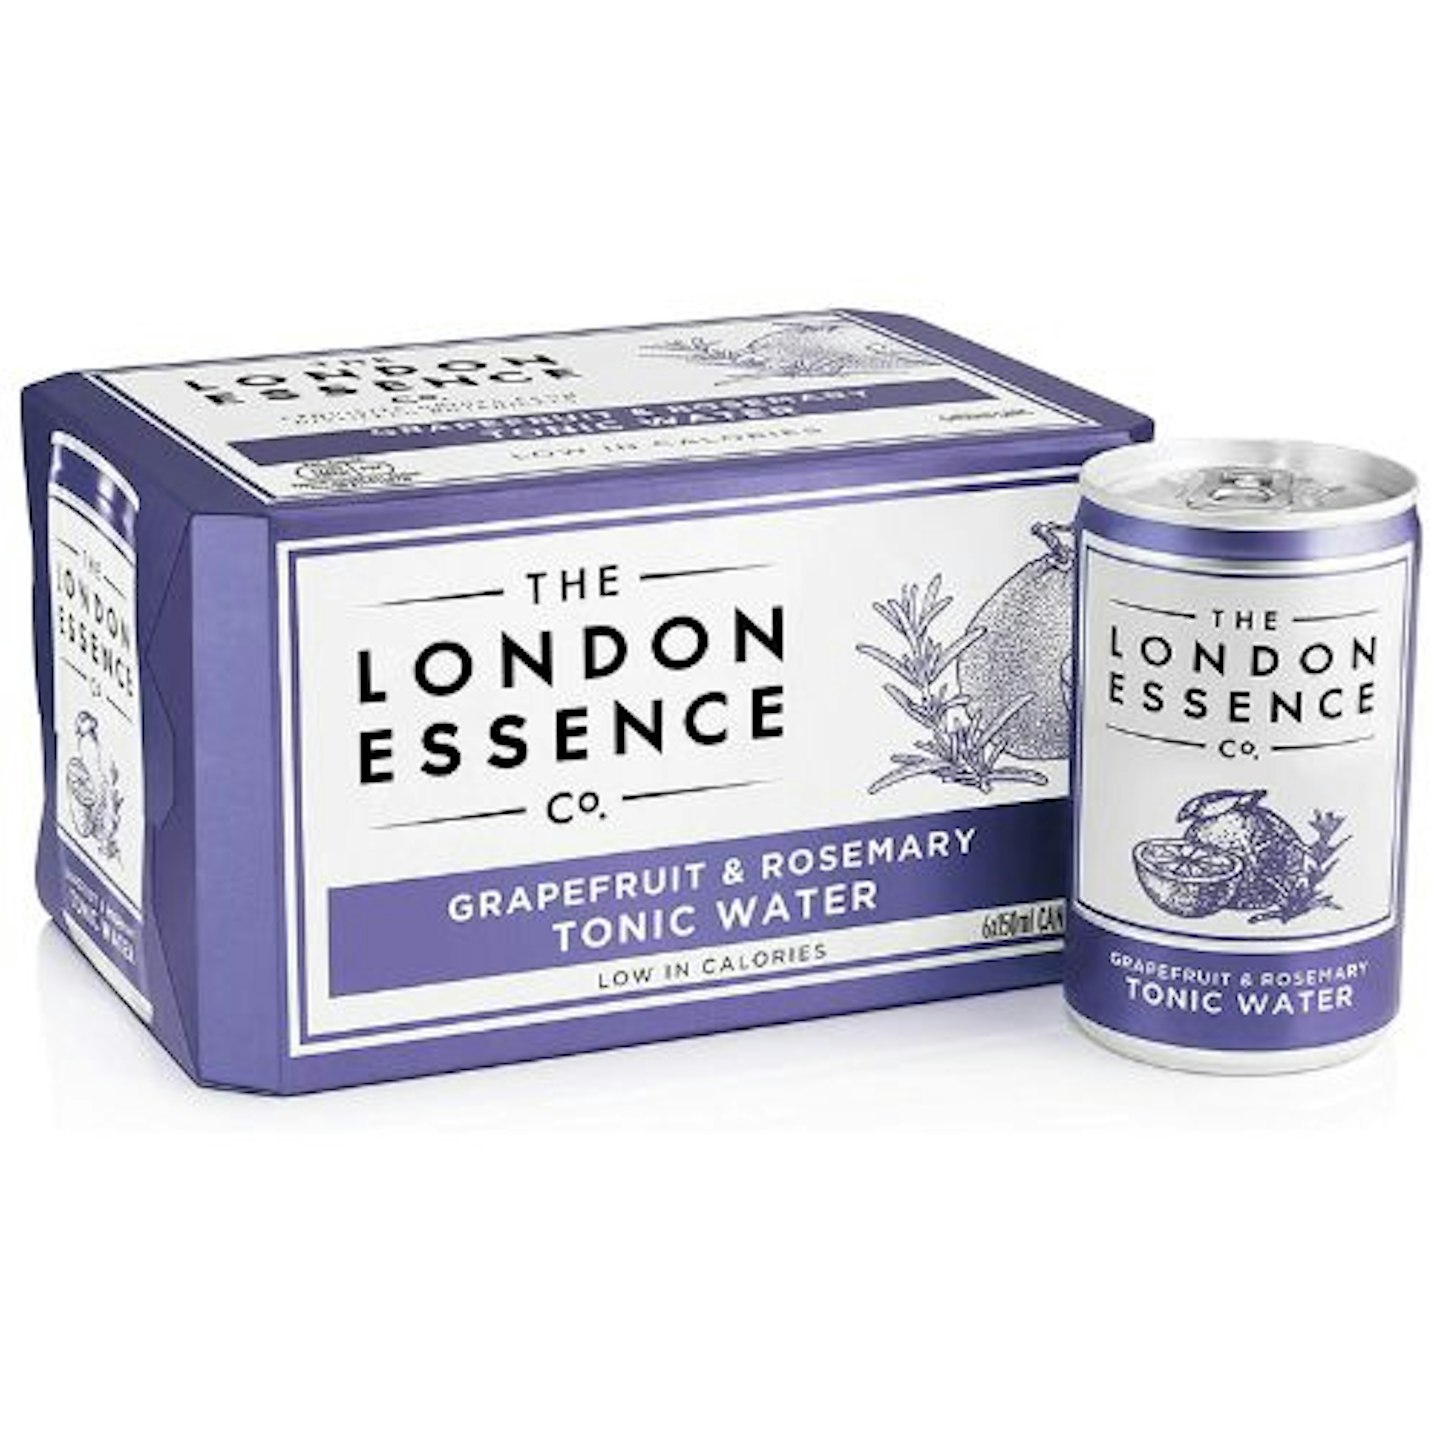 The London Essence Co., Grapefruit & Rosemary Tonic Water (Pack of 6)